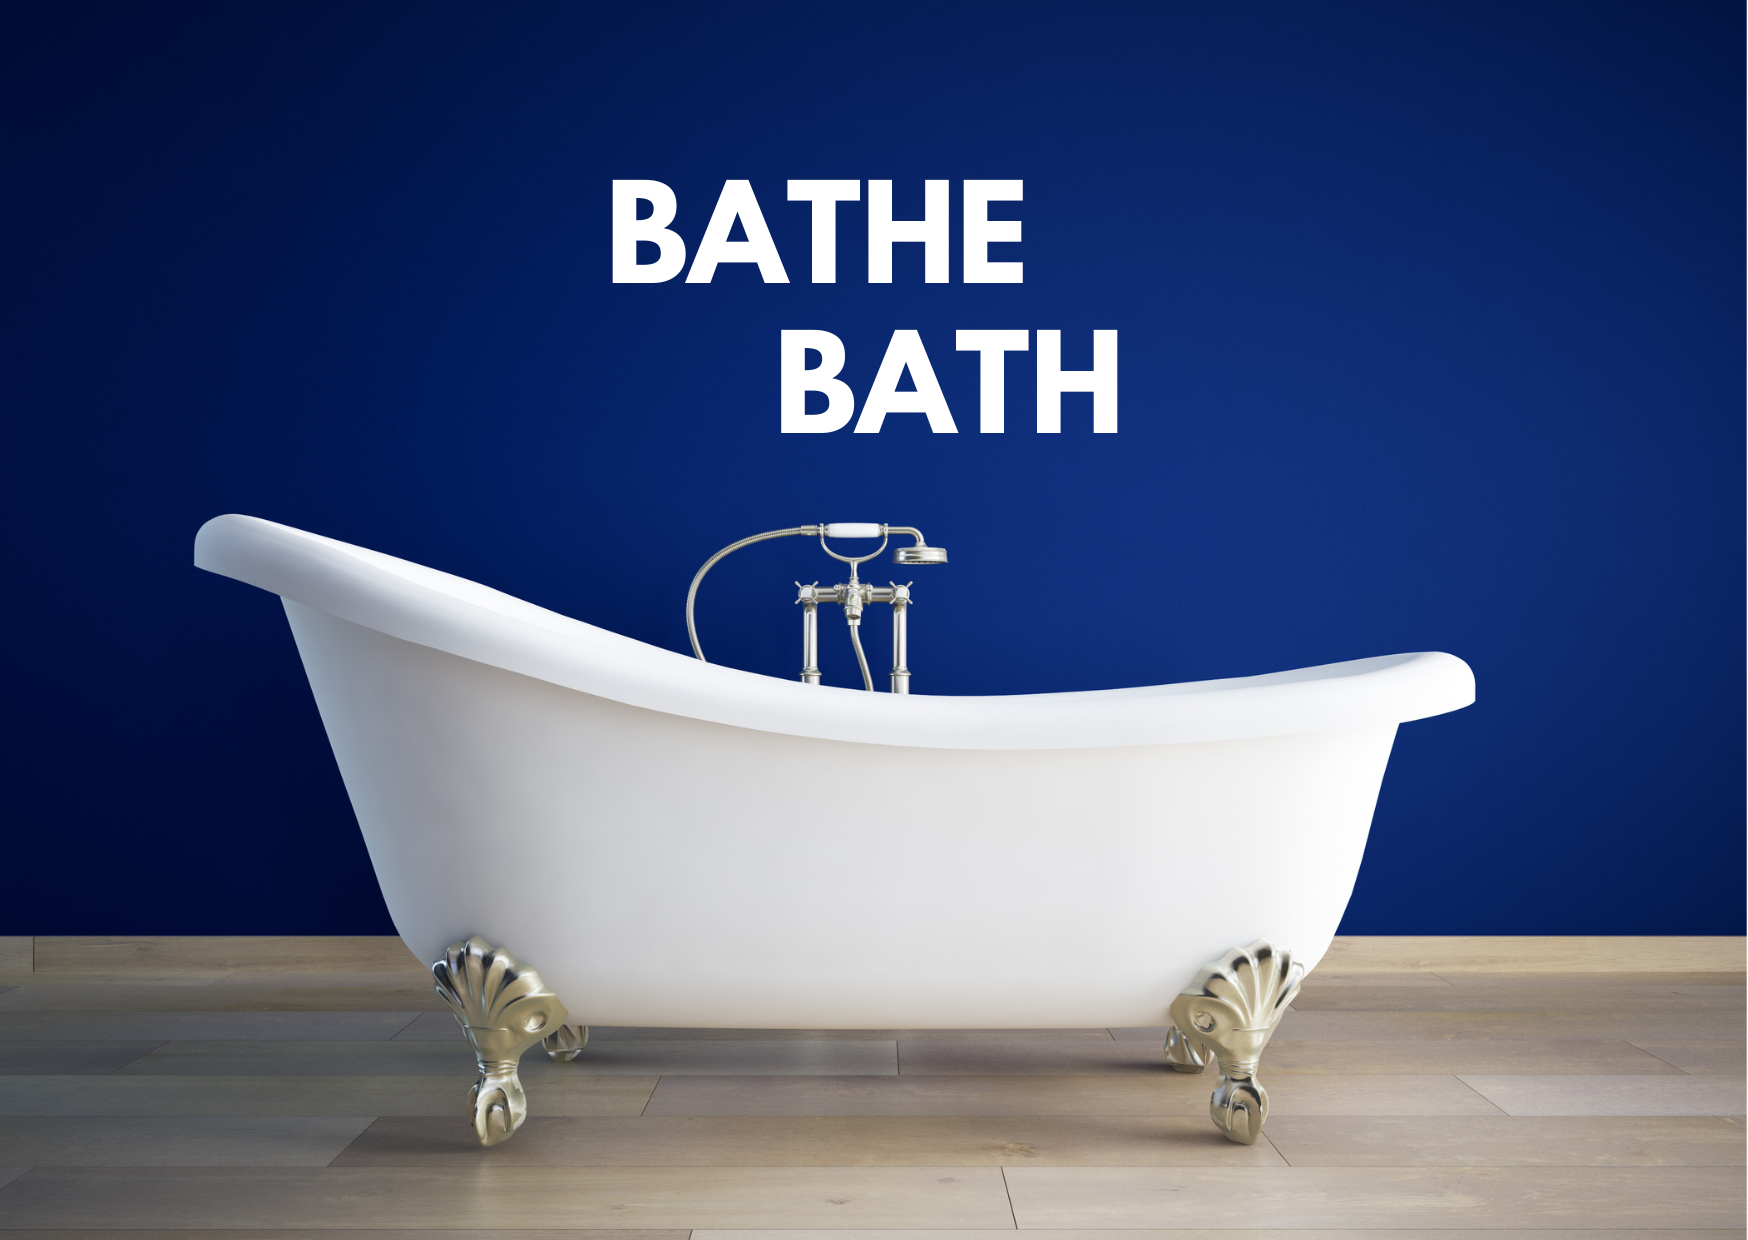 A picture of an antique bathtub on a wooden floor with a blue wall and a caption: "bathe or bath"